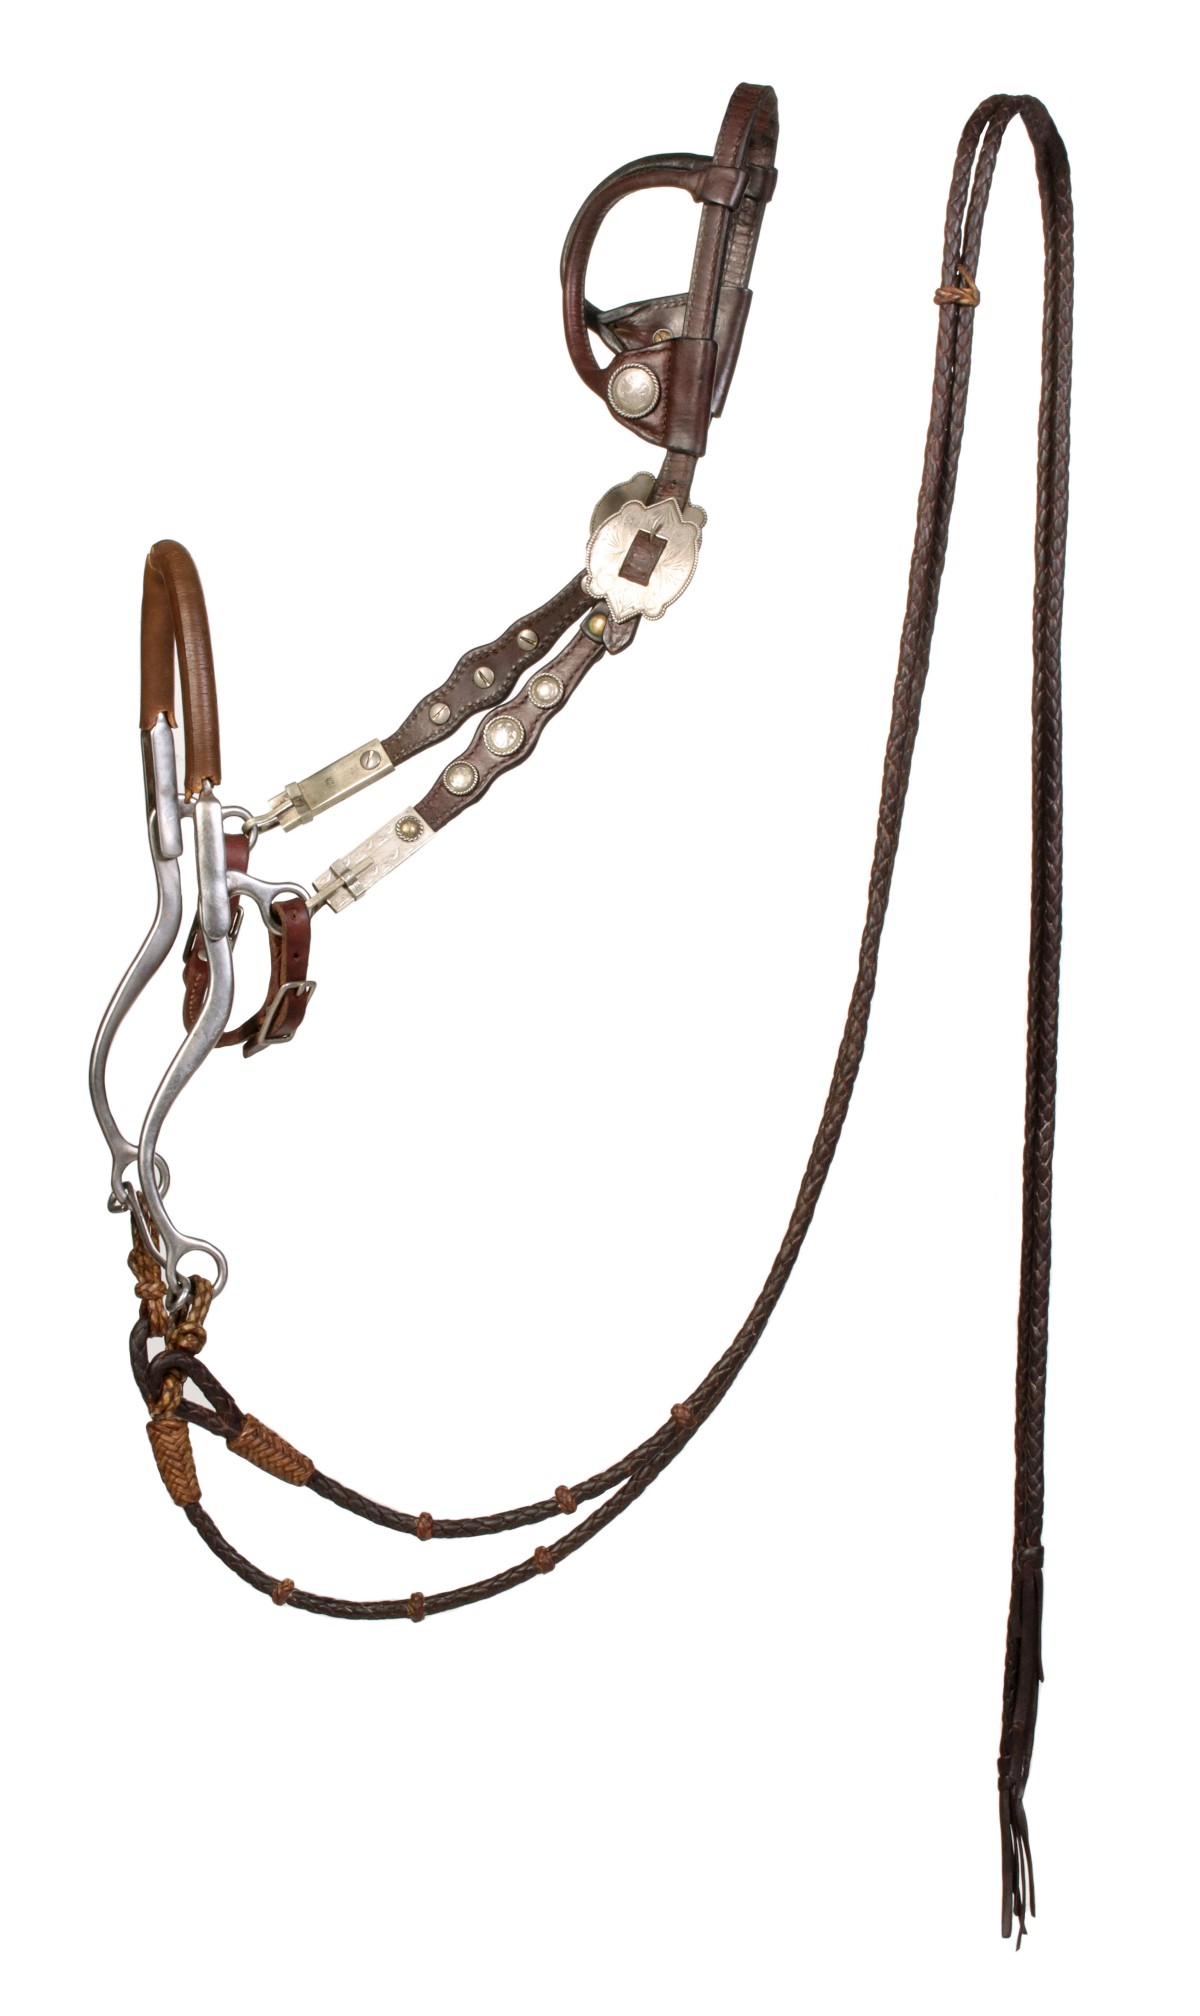 BRAIDED REIN BRIDLE WITH MEXICAN SILVER MOUNTS